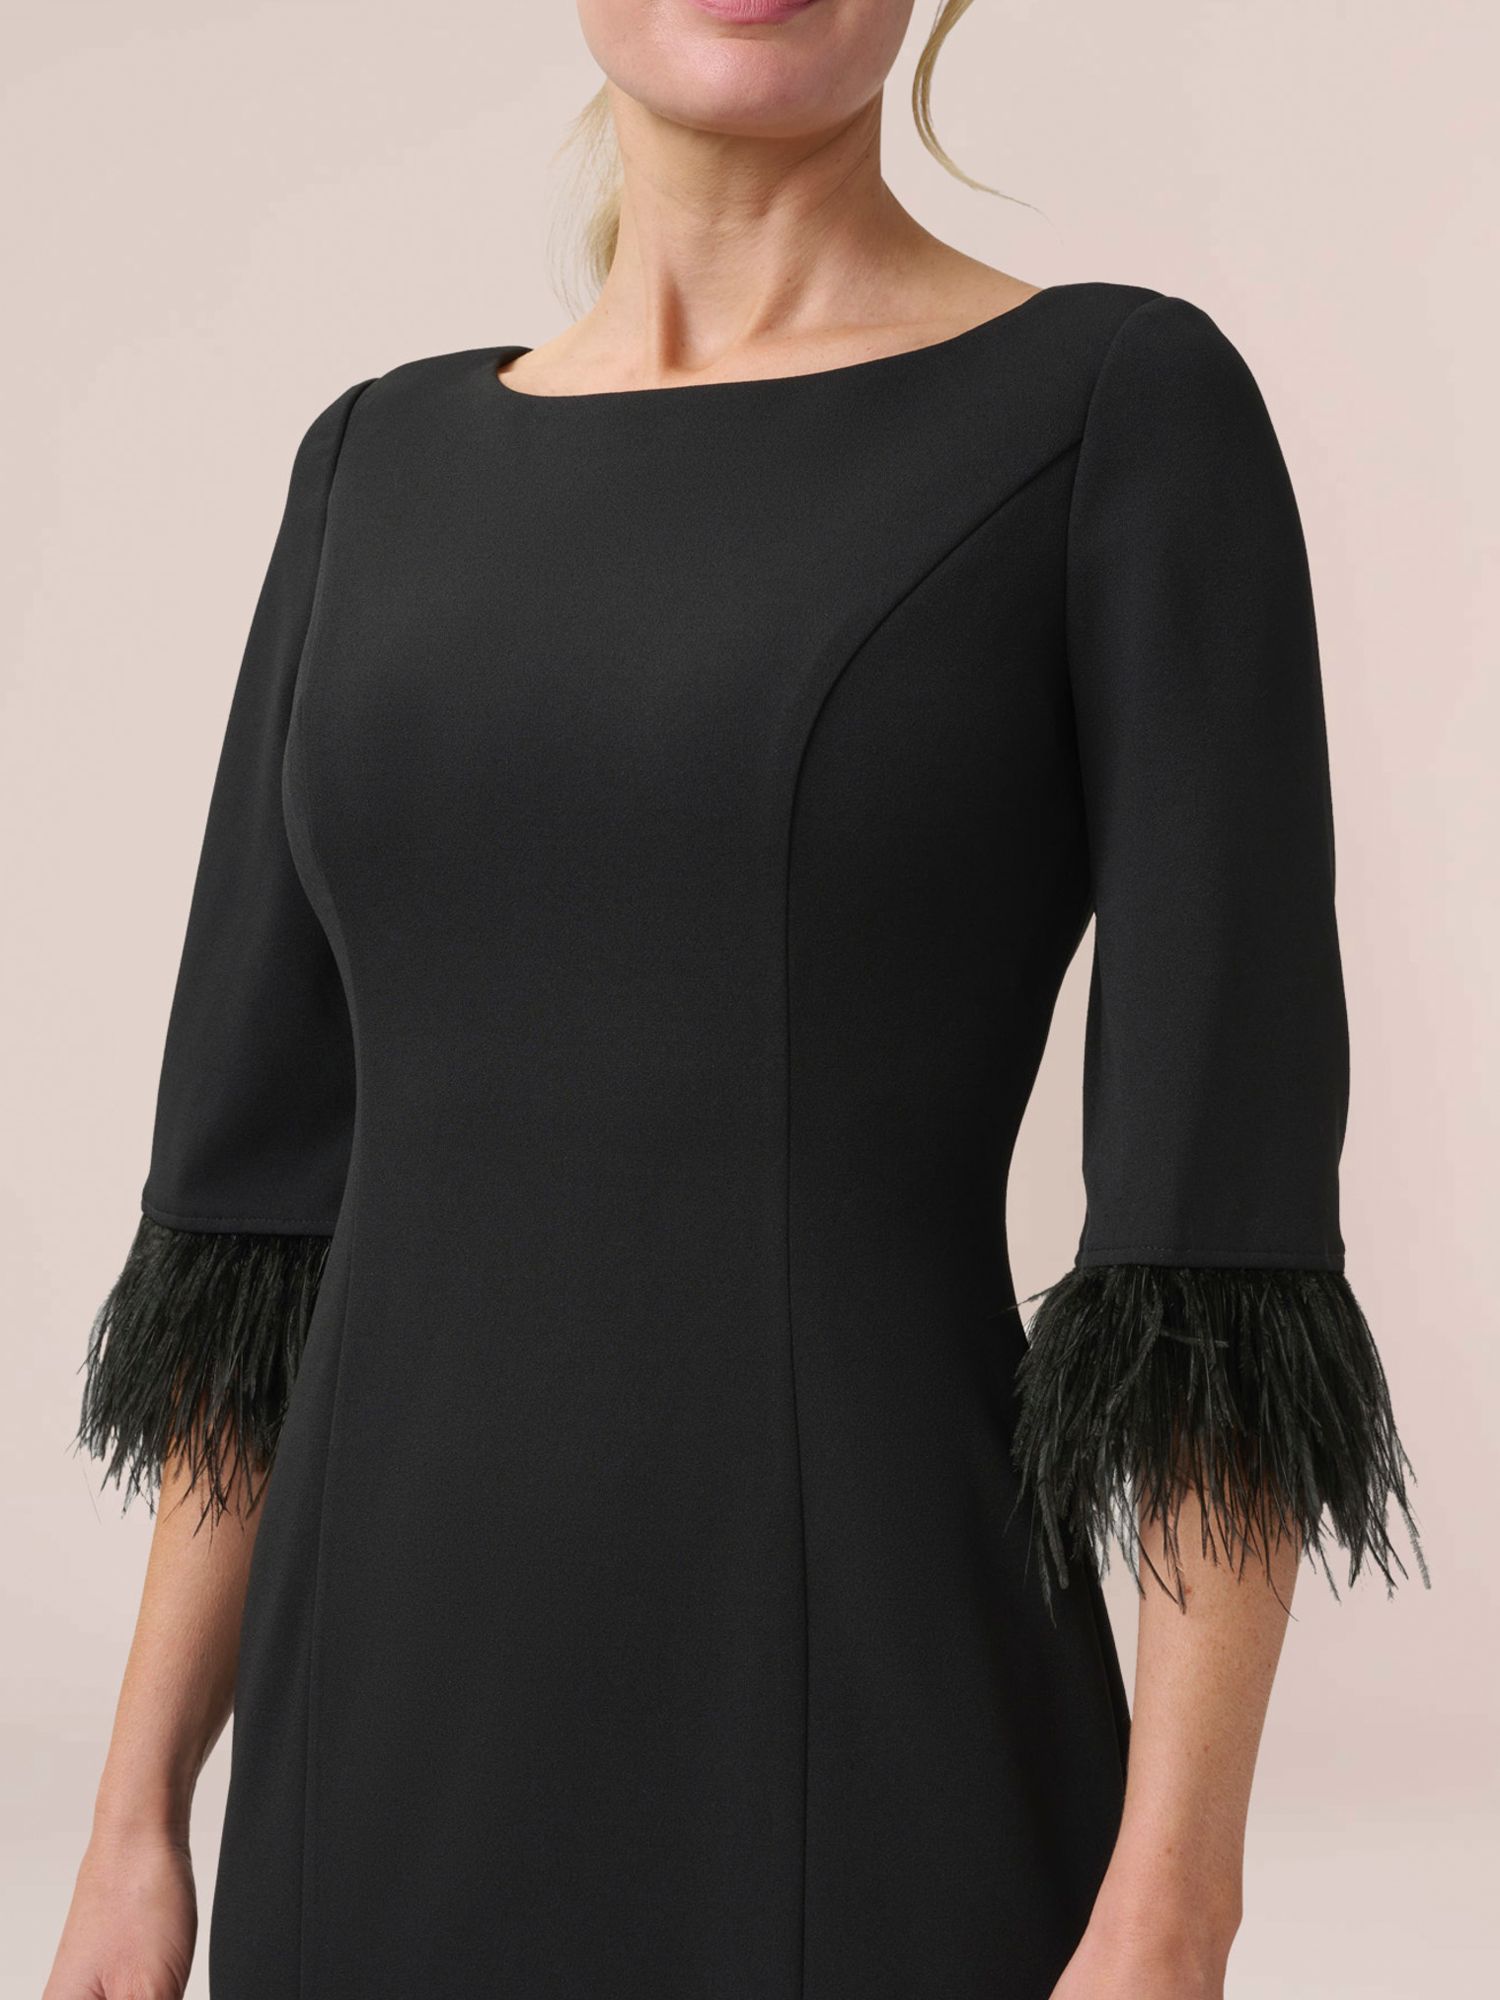 Buy Adrianna Papell Feather Trimmed Sheath Dress, Black Online at johnlewis.com